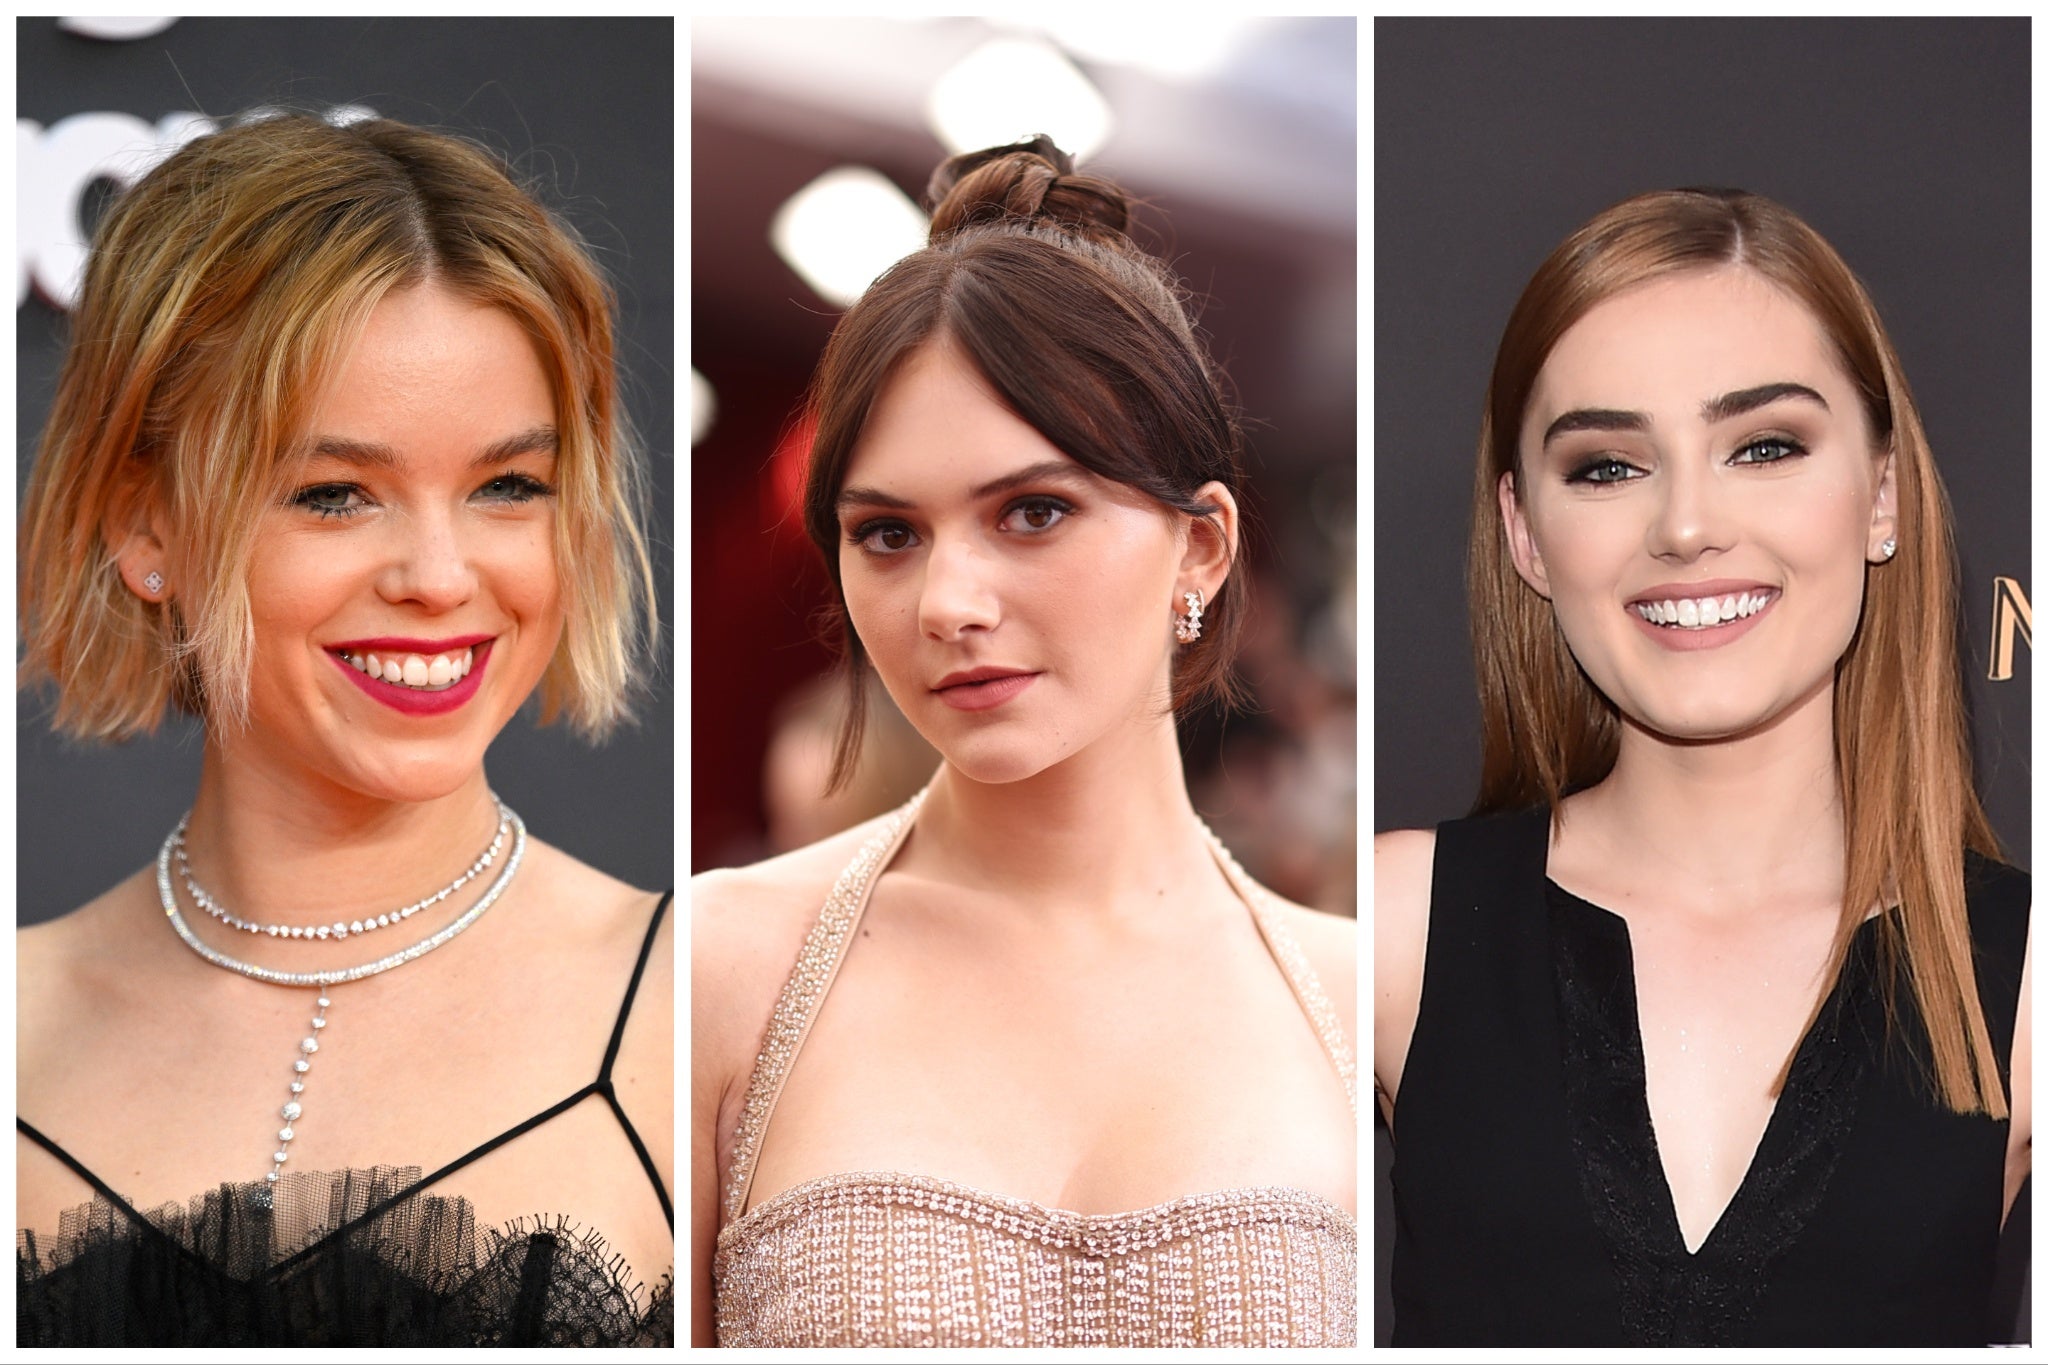 Milly Alcock, Emilia Jones and Meg Donnelly are being considered for DC’s ‘Supergirl'